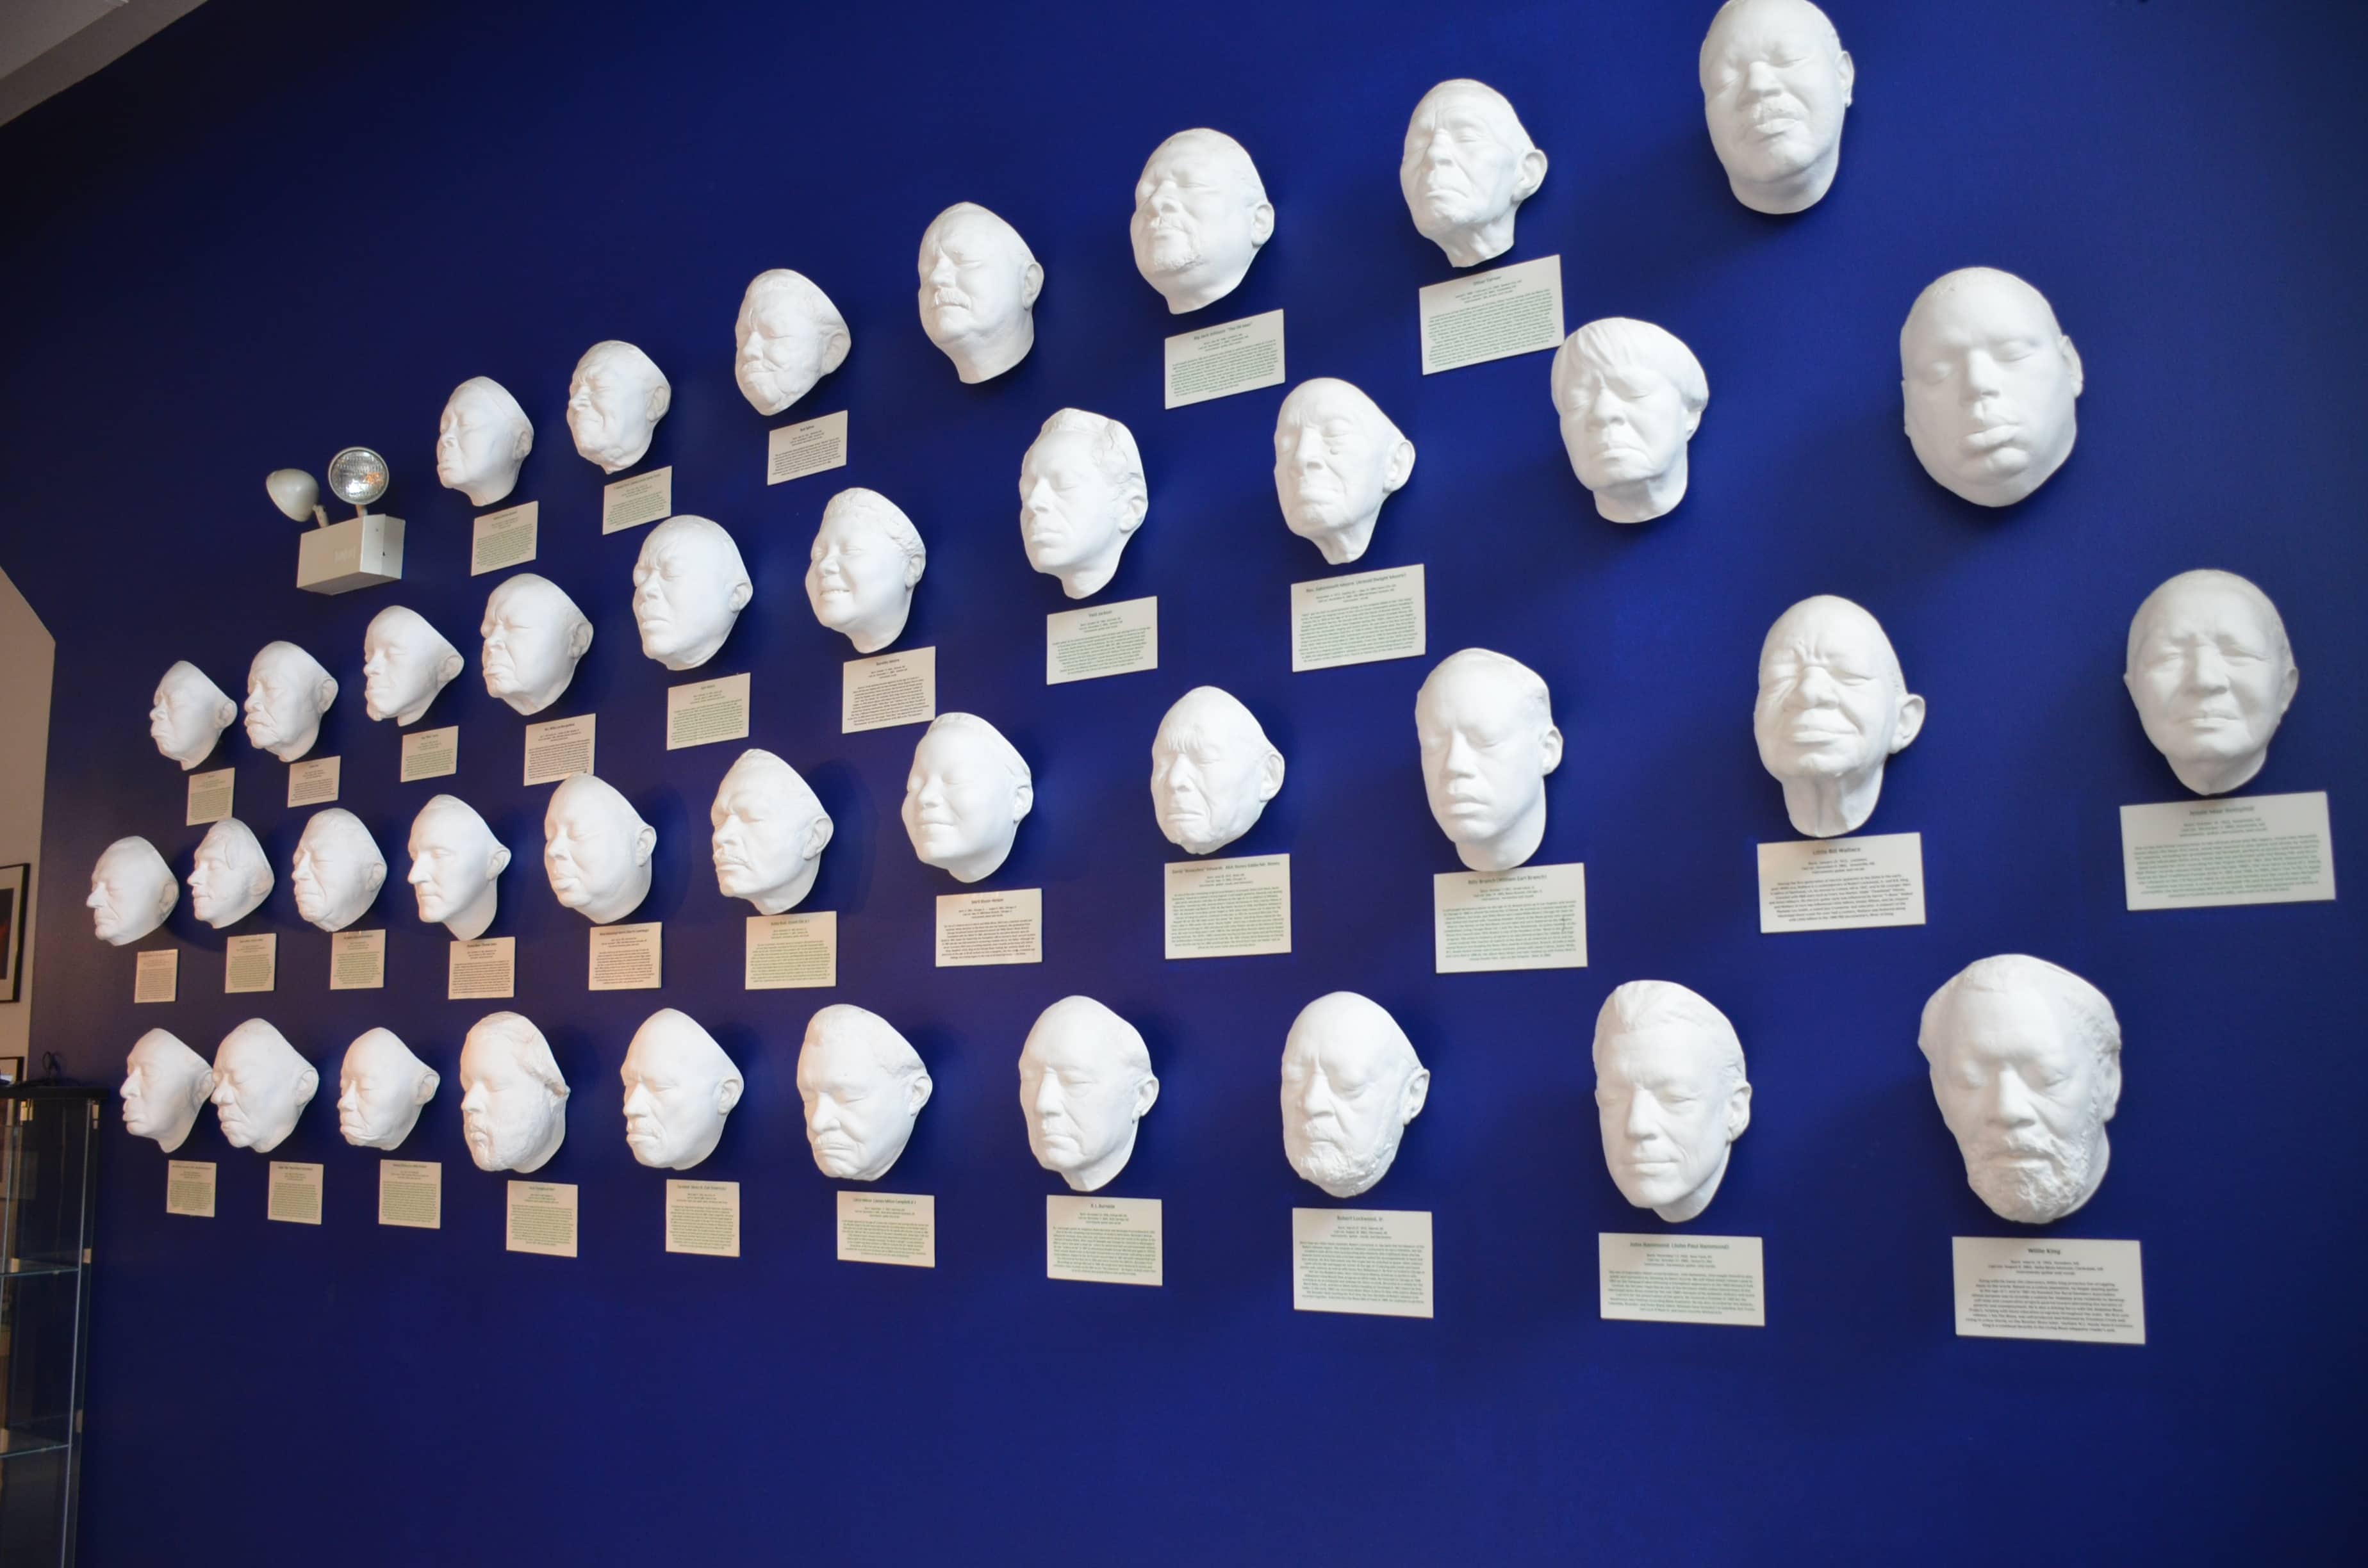 Life masks at Chess Records building (Willie Dixon's Blues Heaven) in Chicago, Illinois